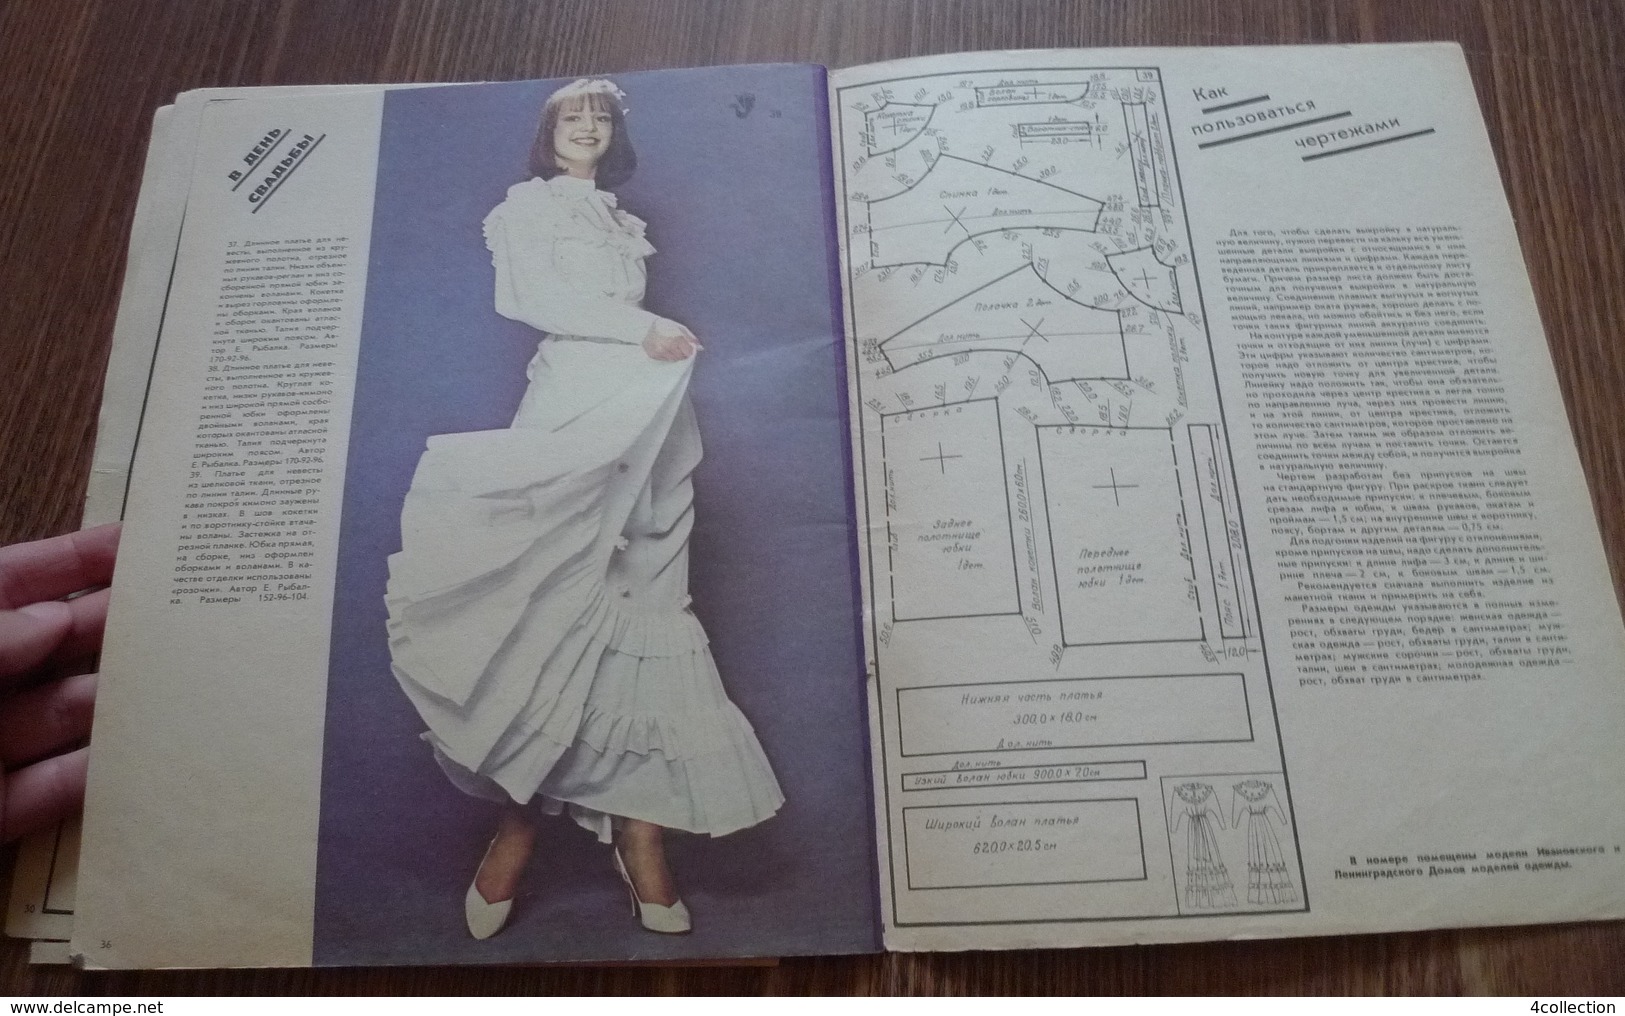 USSR Soviet Russia Leningrad Fashion Magazine Supplement SEW IT YOURSELF w/ patterns clothing models with cut designs